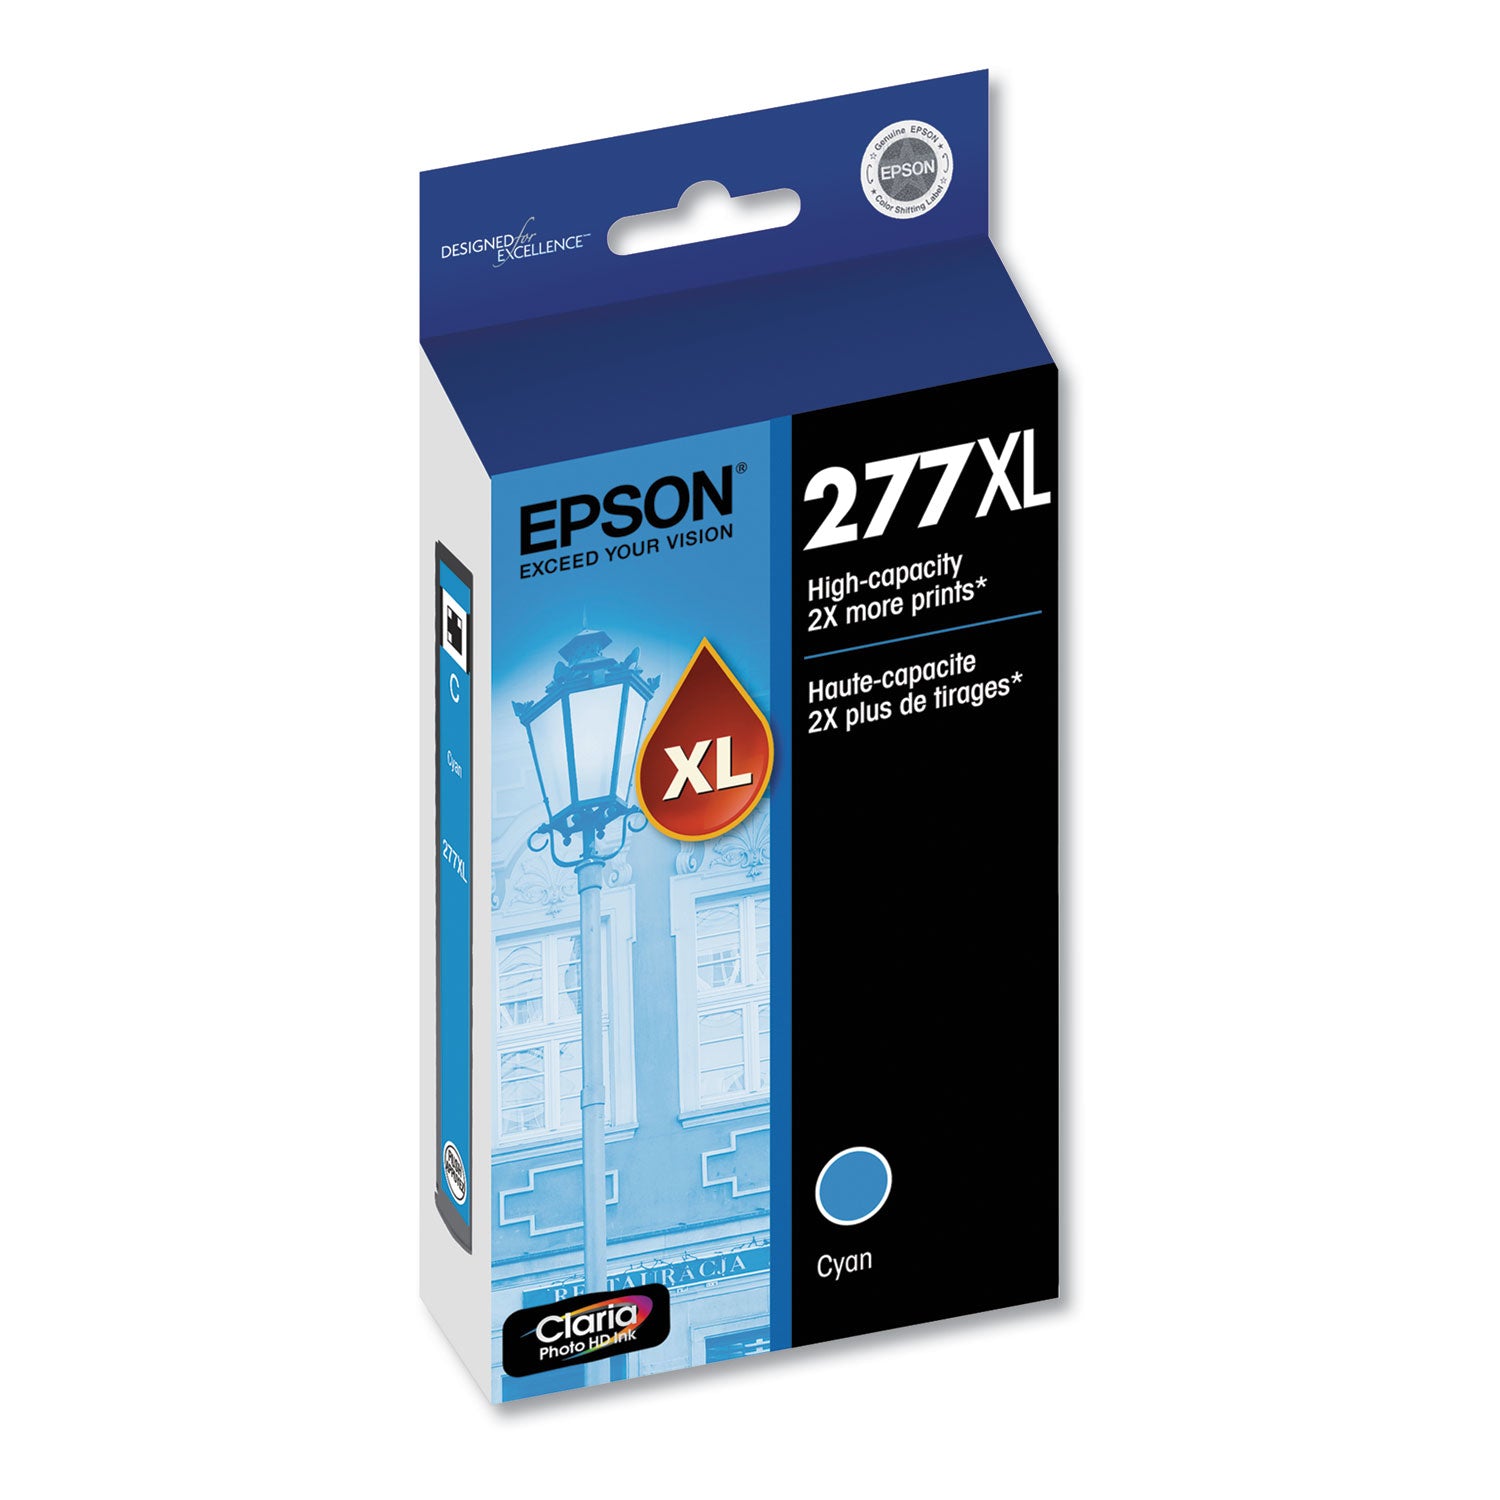 t277xl220-s-277xl-claria-high-yield-ink-740-page-yield-cyan_epst277xl220s - 2